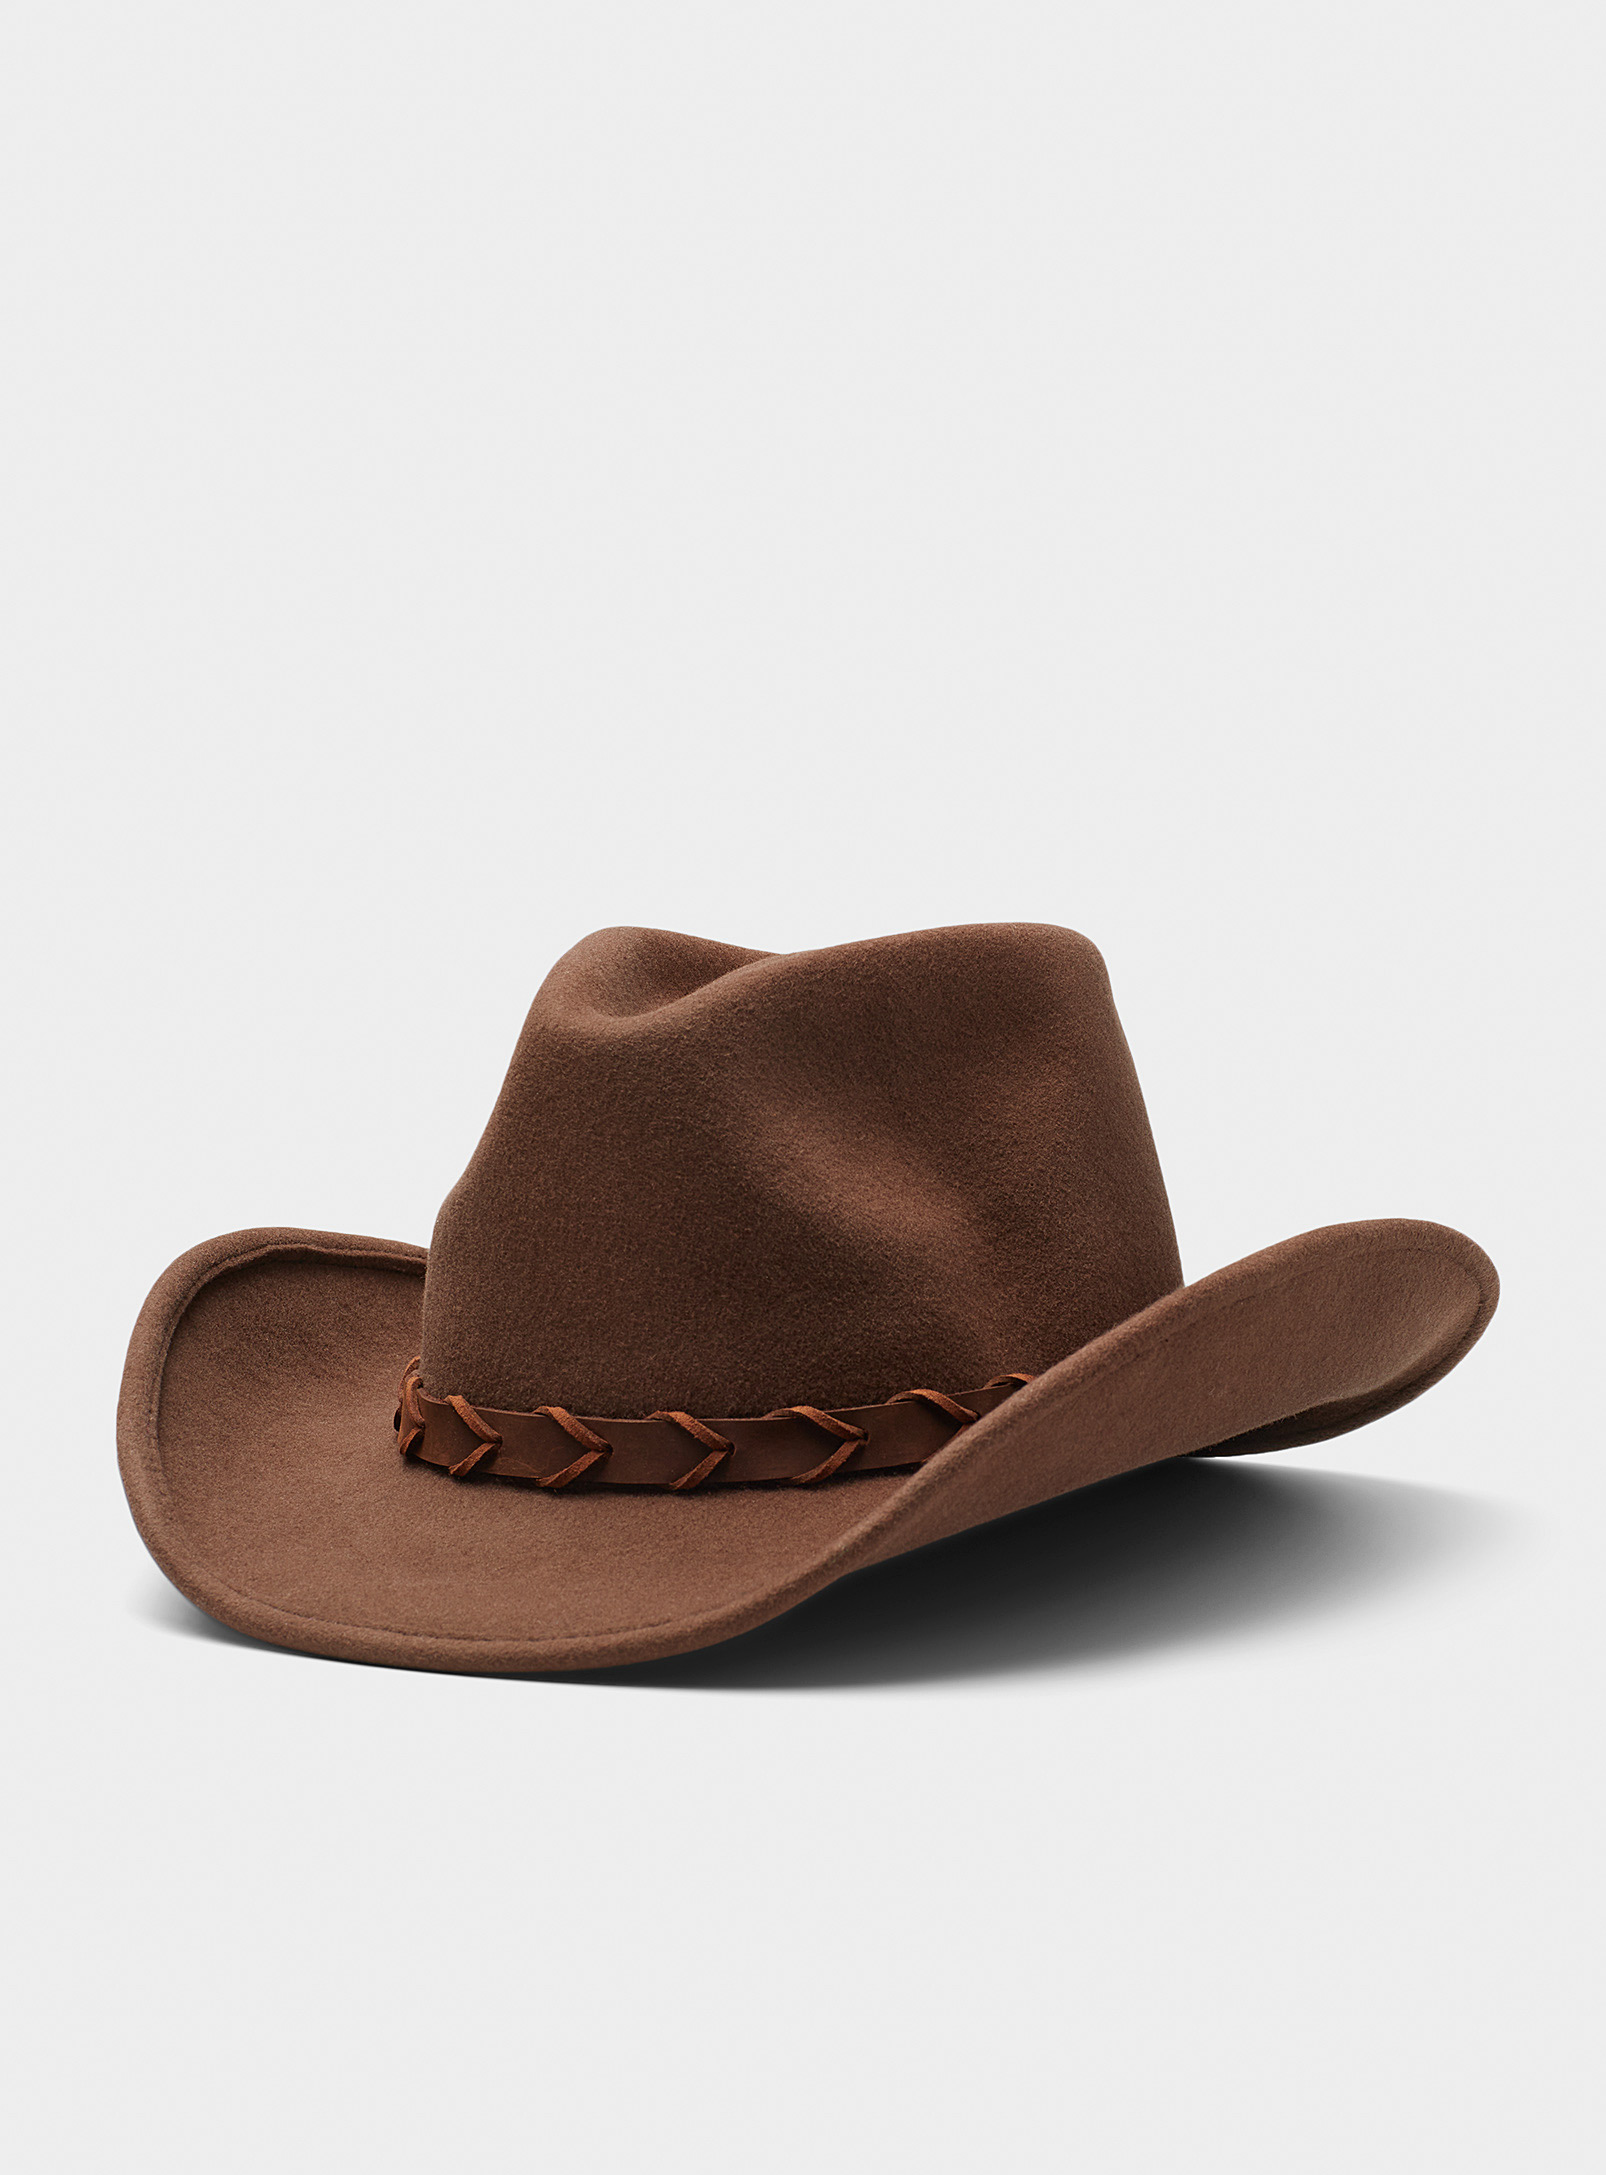 Peter Grimm Leather Band Felt Cowboy Hat In Brown